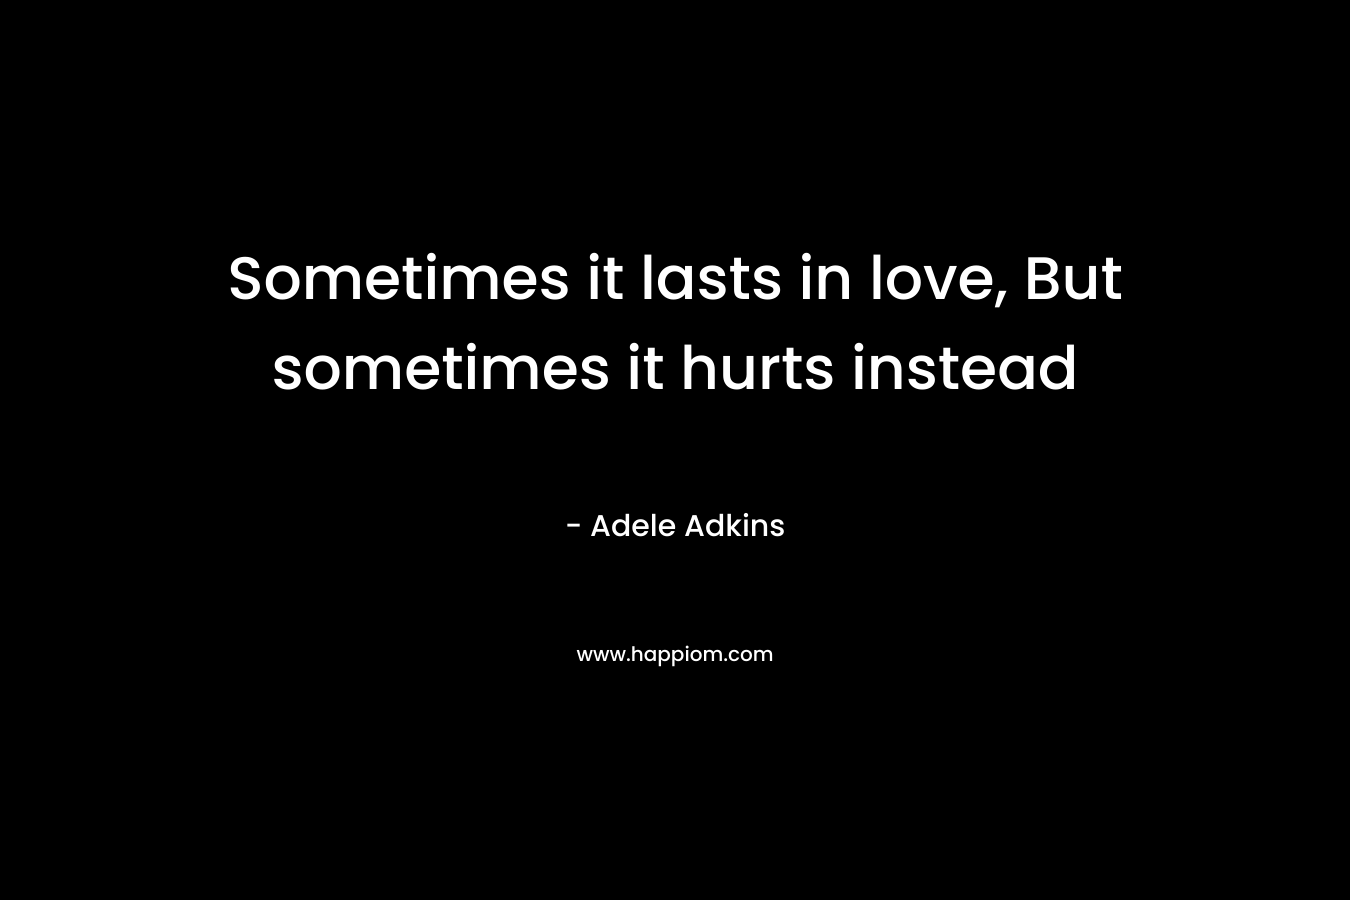 Sometimes it lasts in love, But sometimes it hurts instead